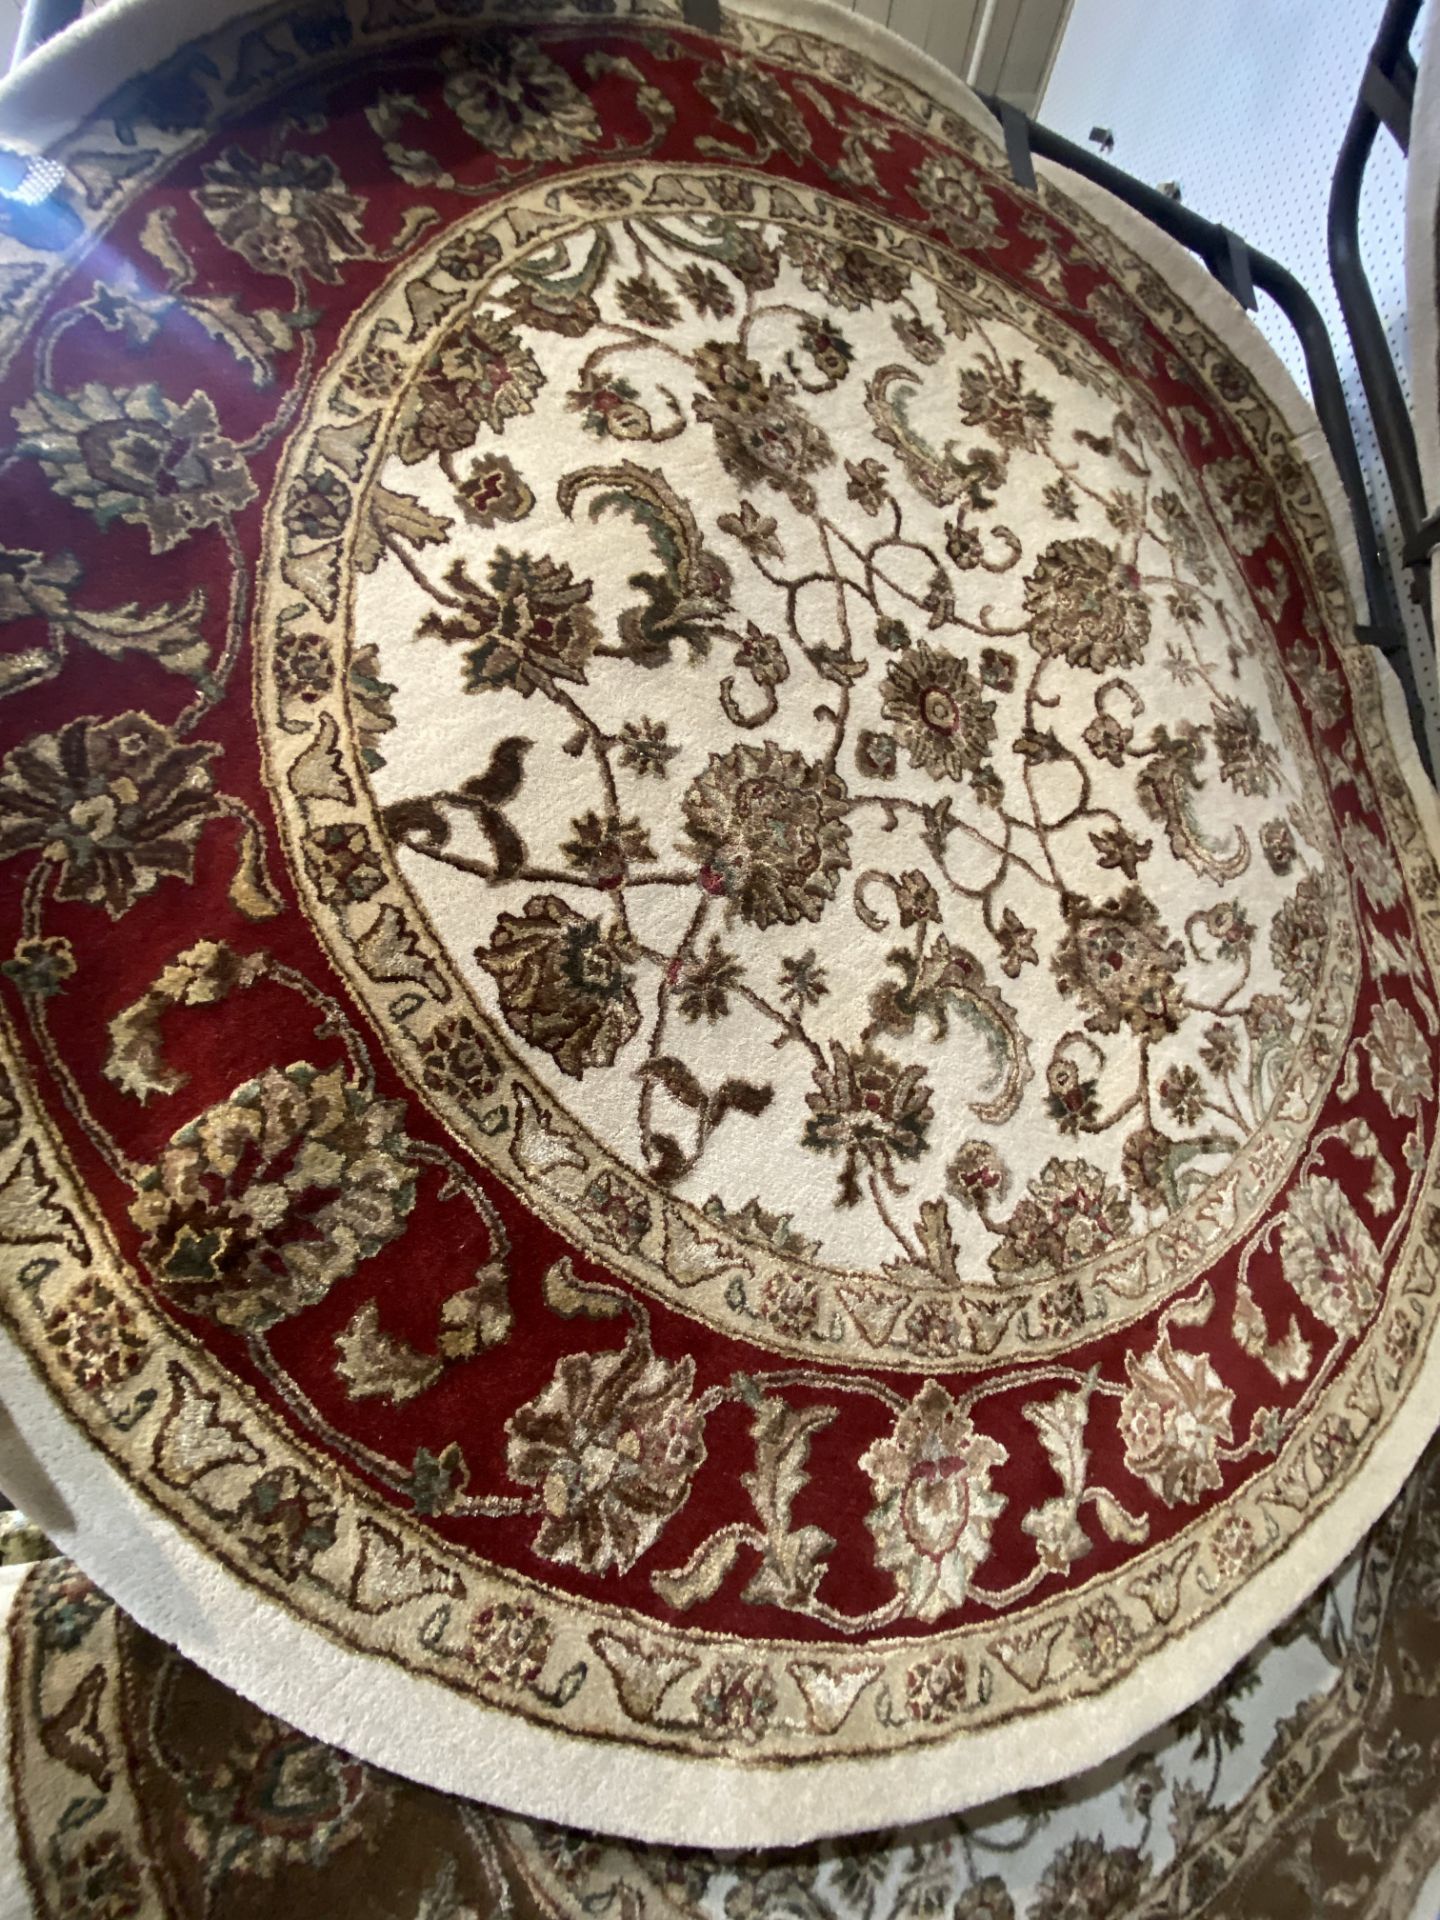 APPROX. 5' ROUND CARPET